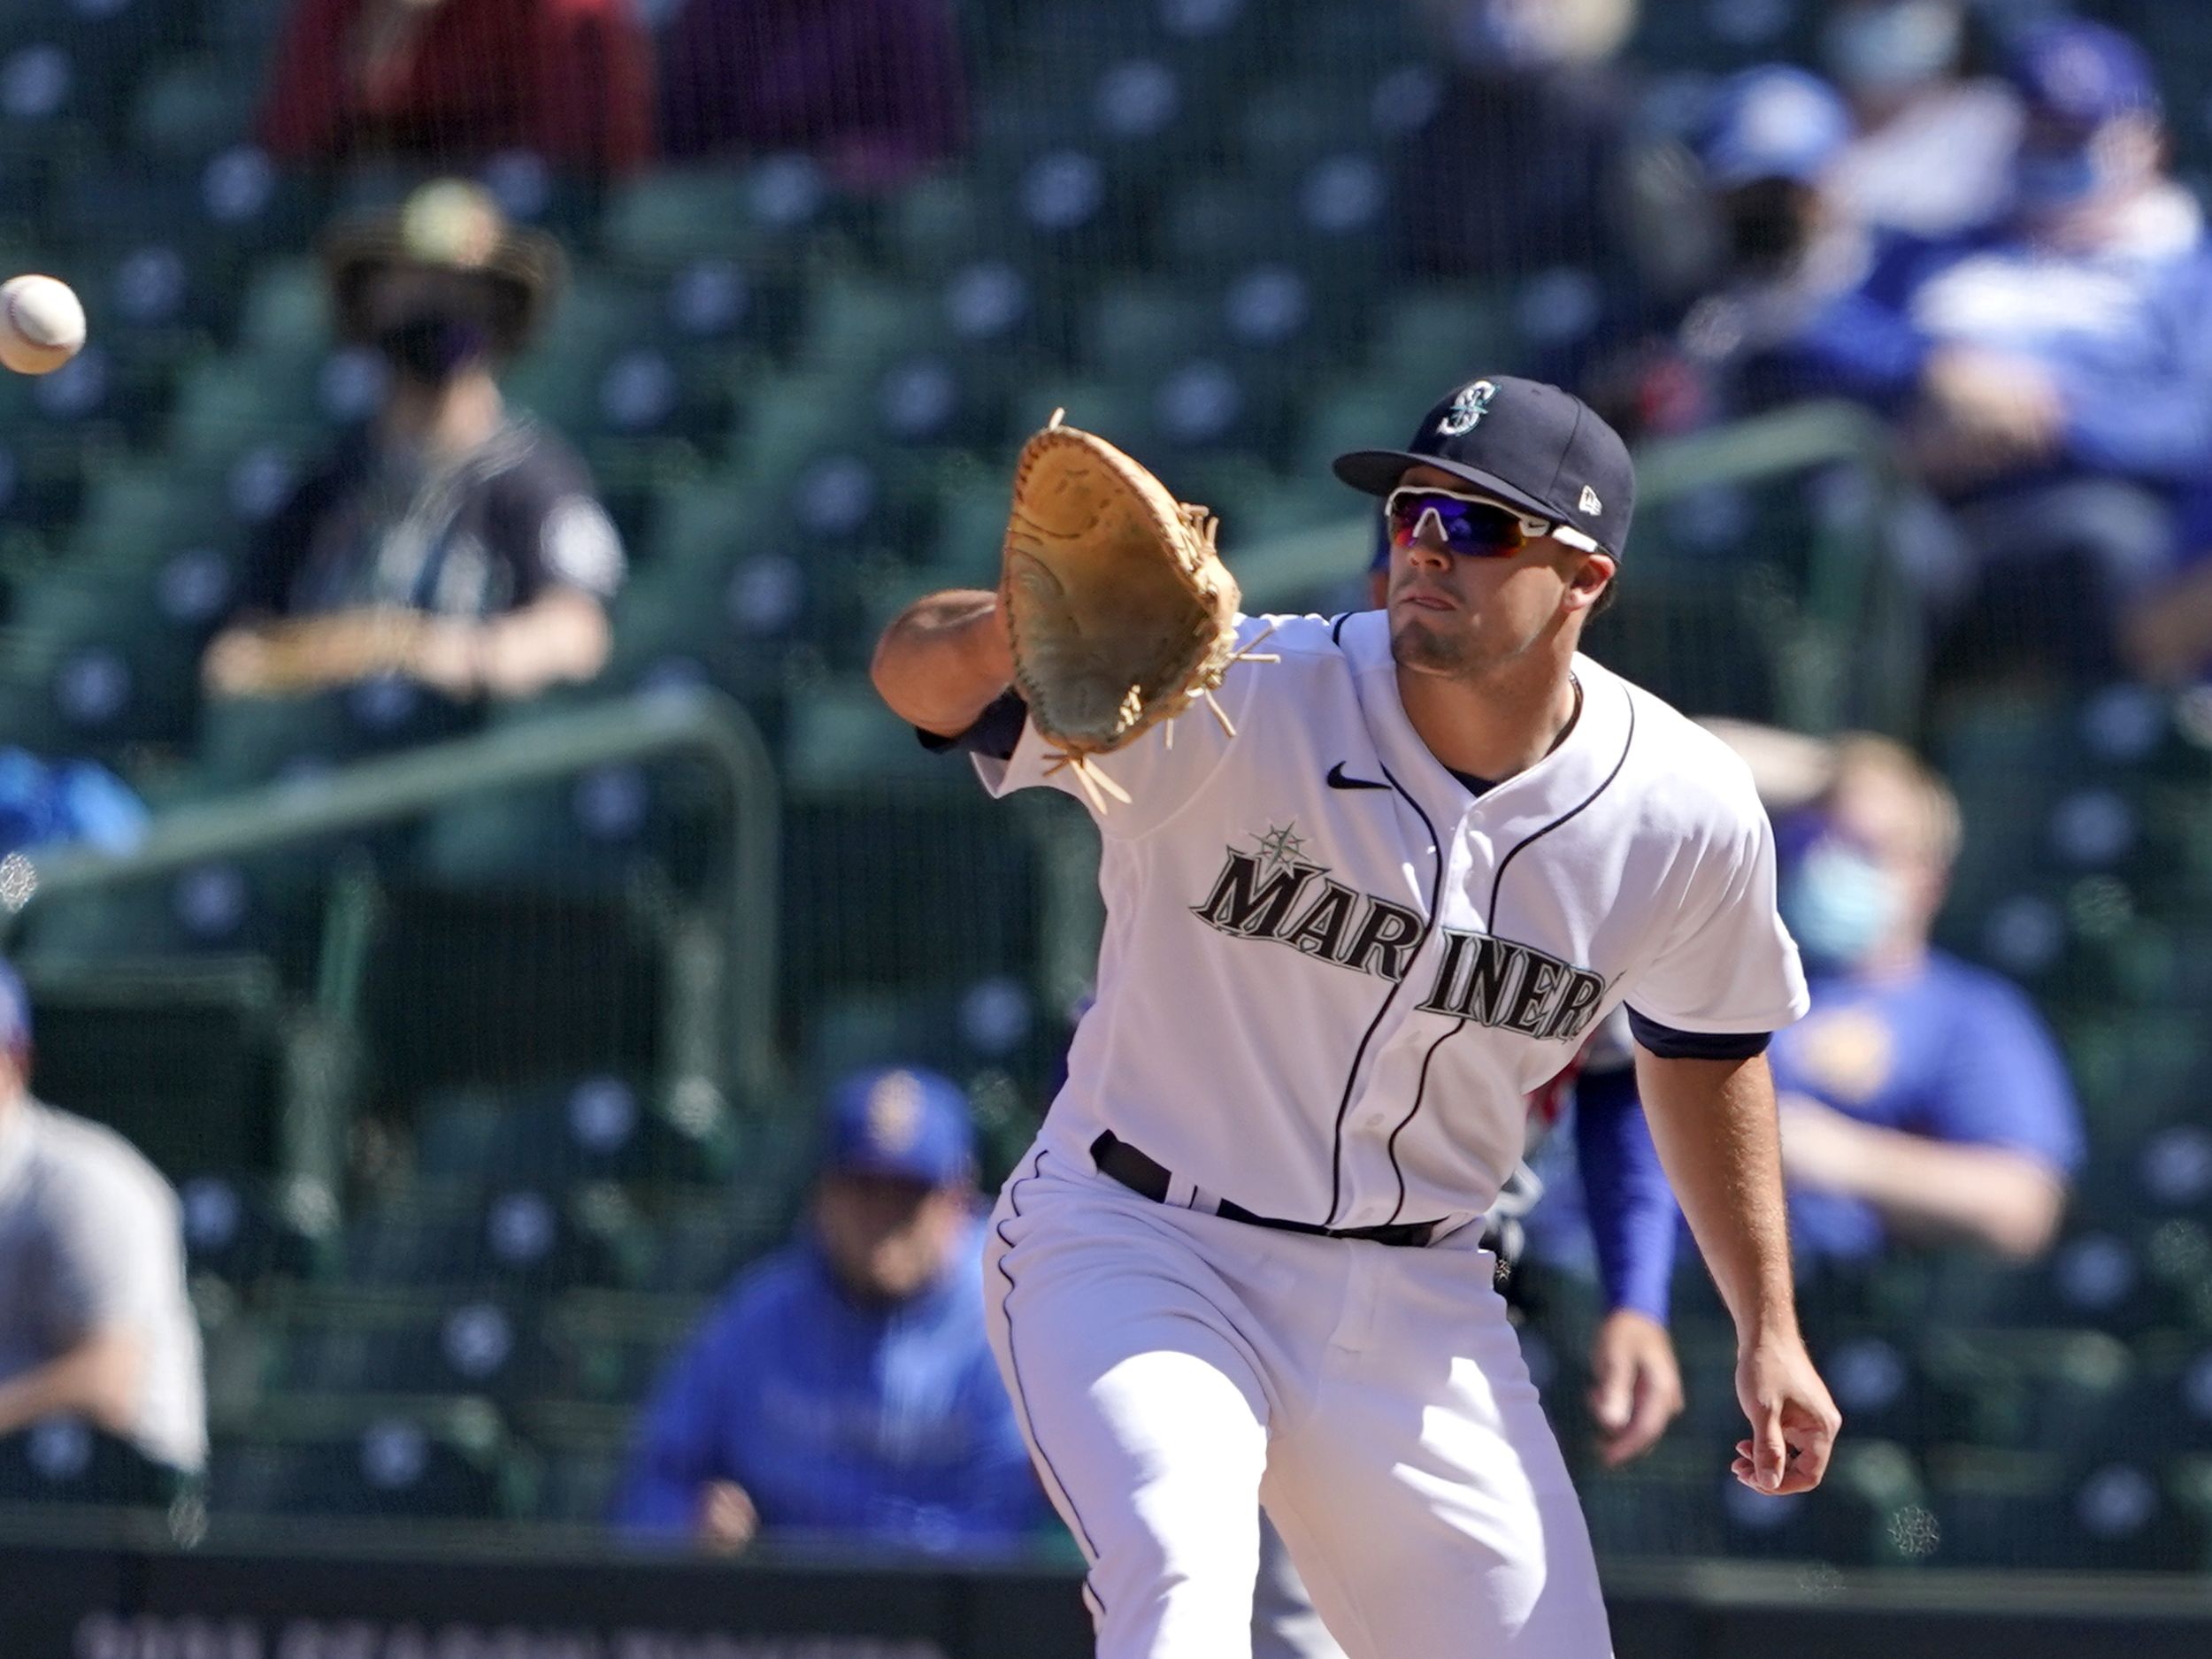 Mariners first baseman Evan White looks like 'the real deal